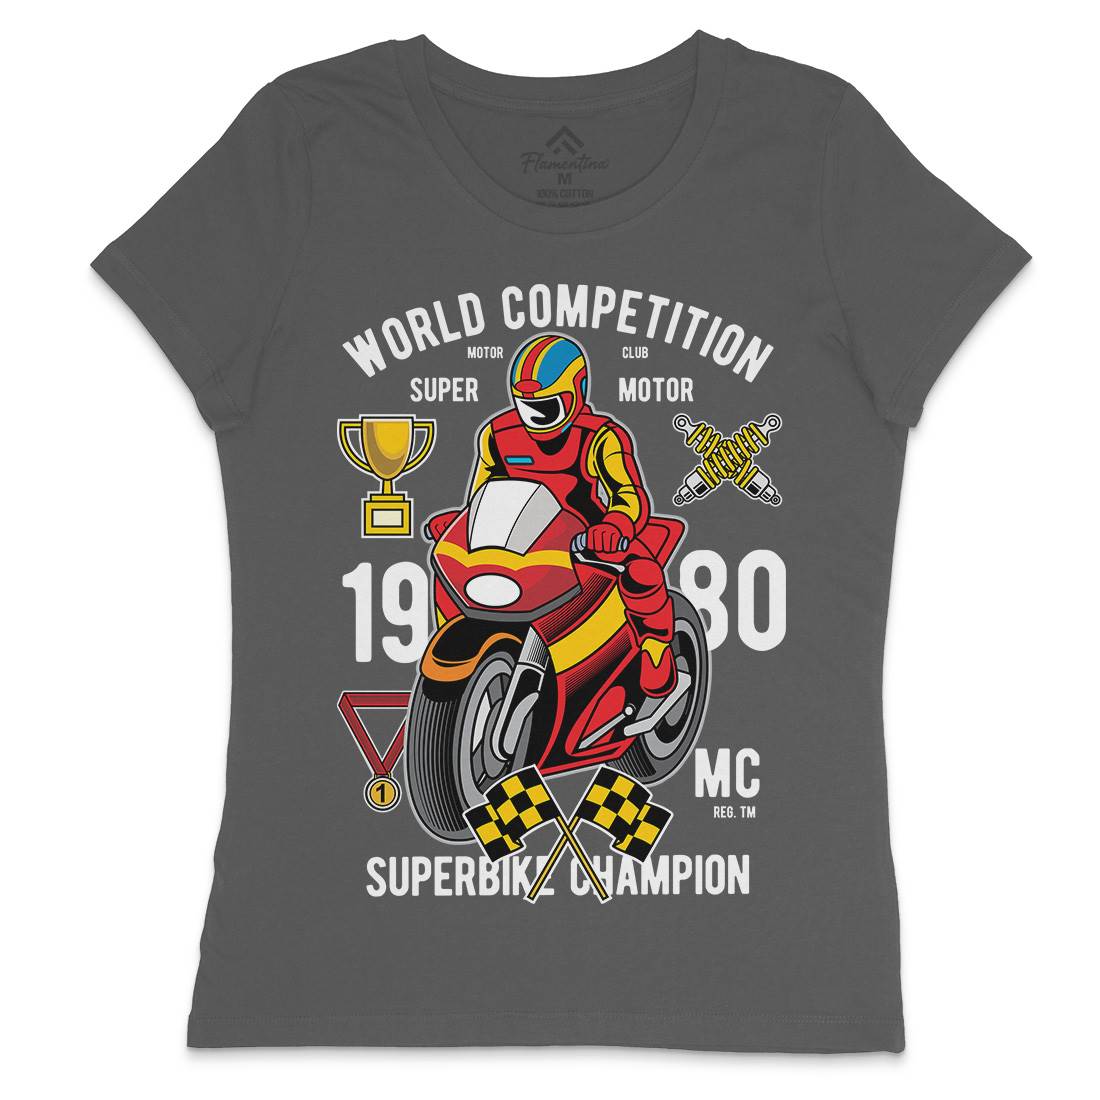 Super Bike World Competition Womens Crew Neck T-Shirt Motorcycles C458